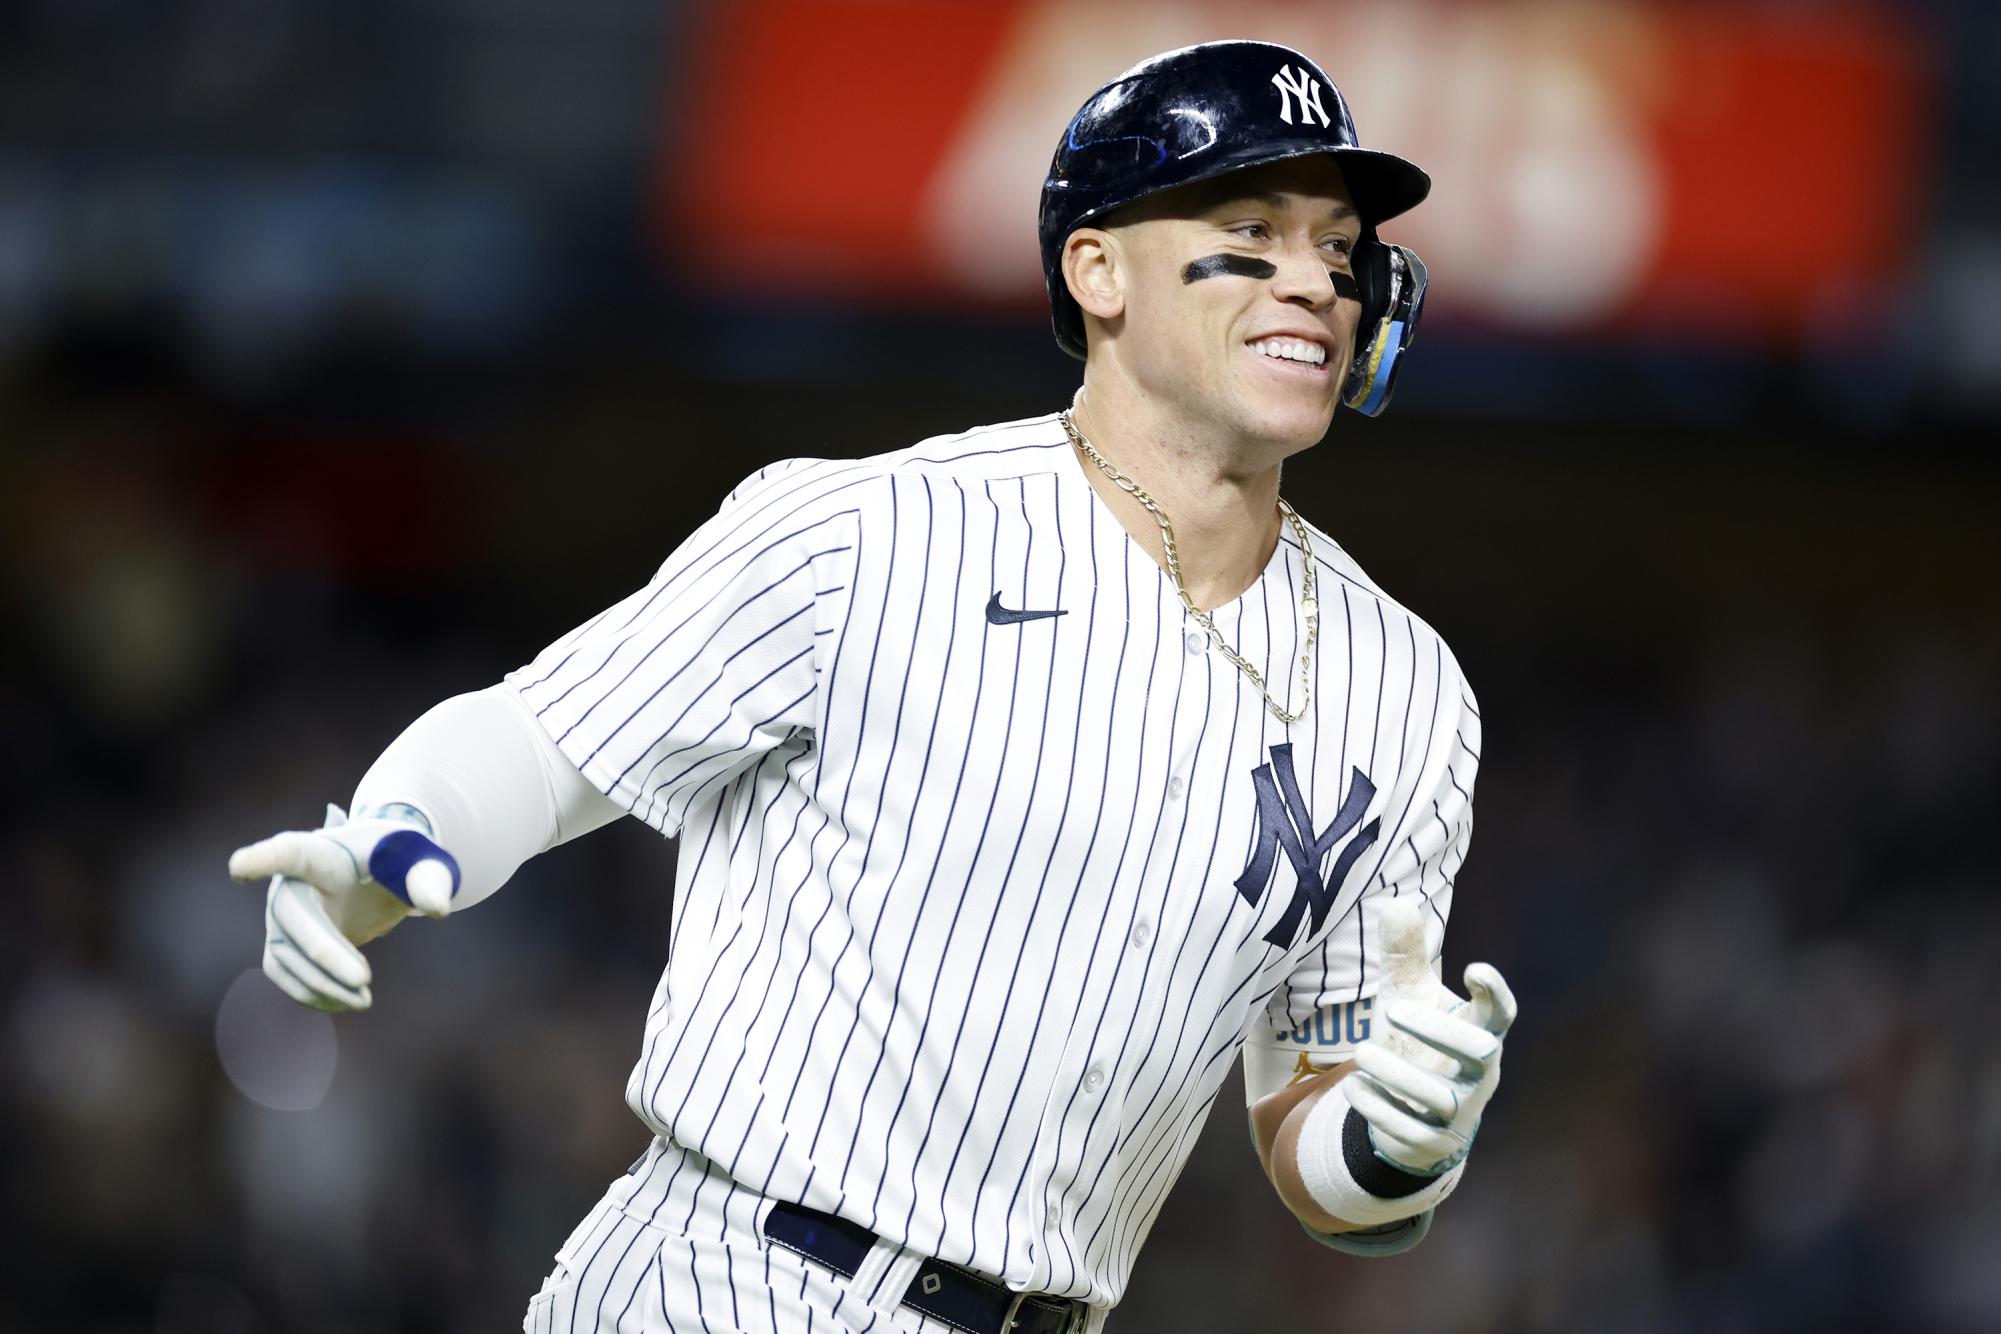 Fresno State to Retire Aaron Judge's Jersey, Honor Yankees Star at